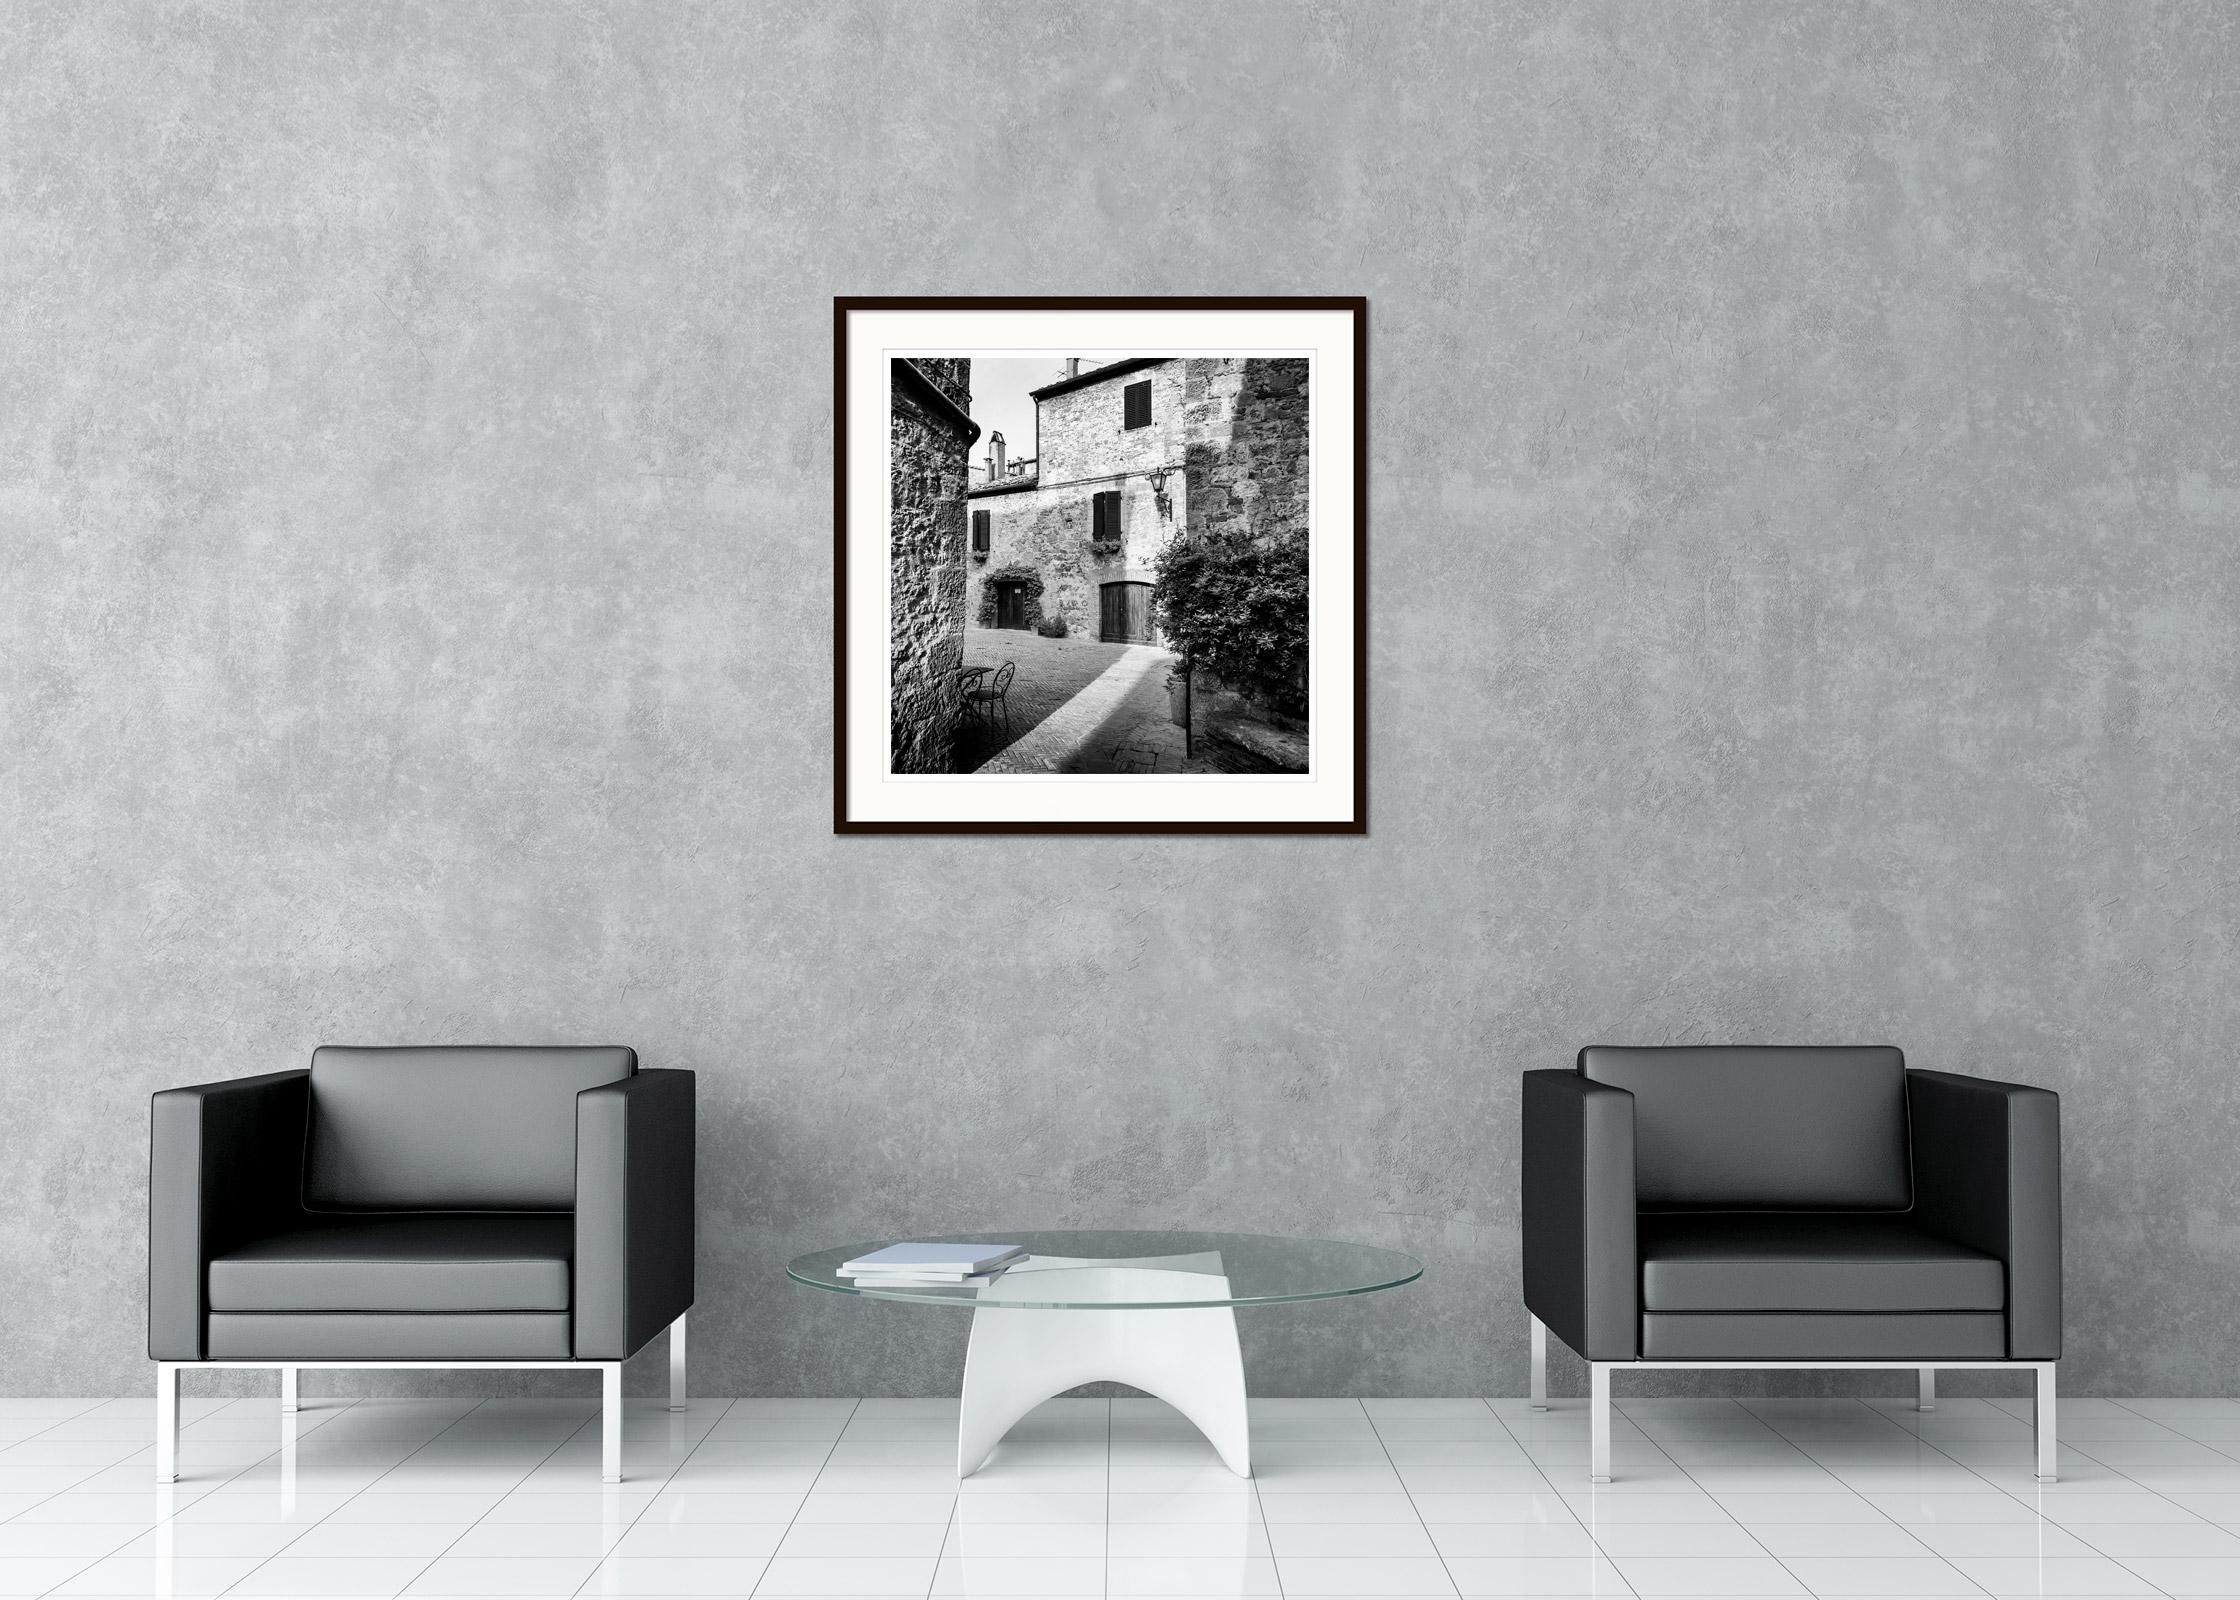 Black and white fine art cityscape - landscape photography. Archival pigment ink print as part of a limited edition of 8. All Gerald Berghammer prints are made to order in limited editions on Hahnemuehle Photo Rag Baryta. Each print is stamped on